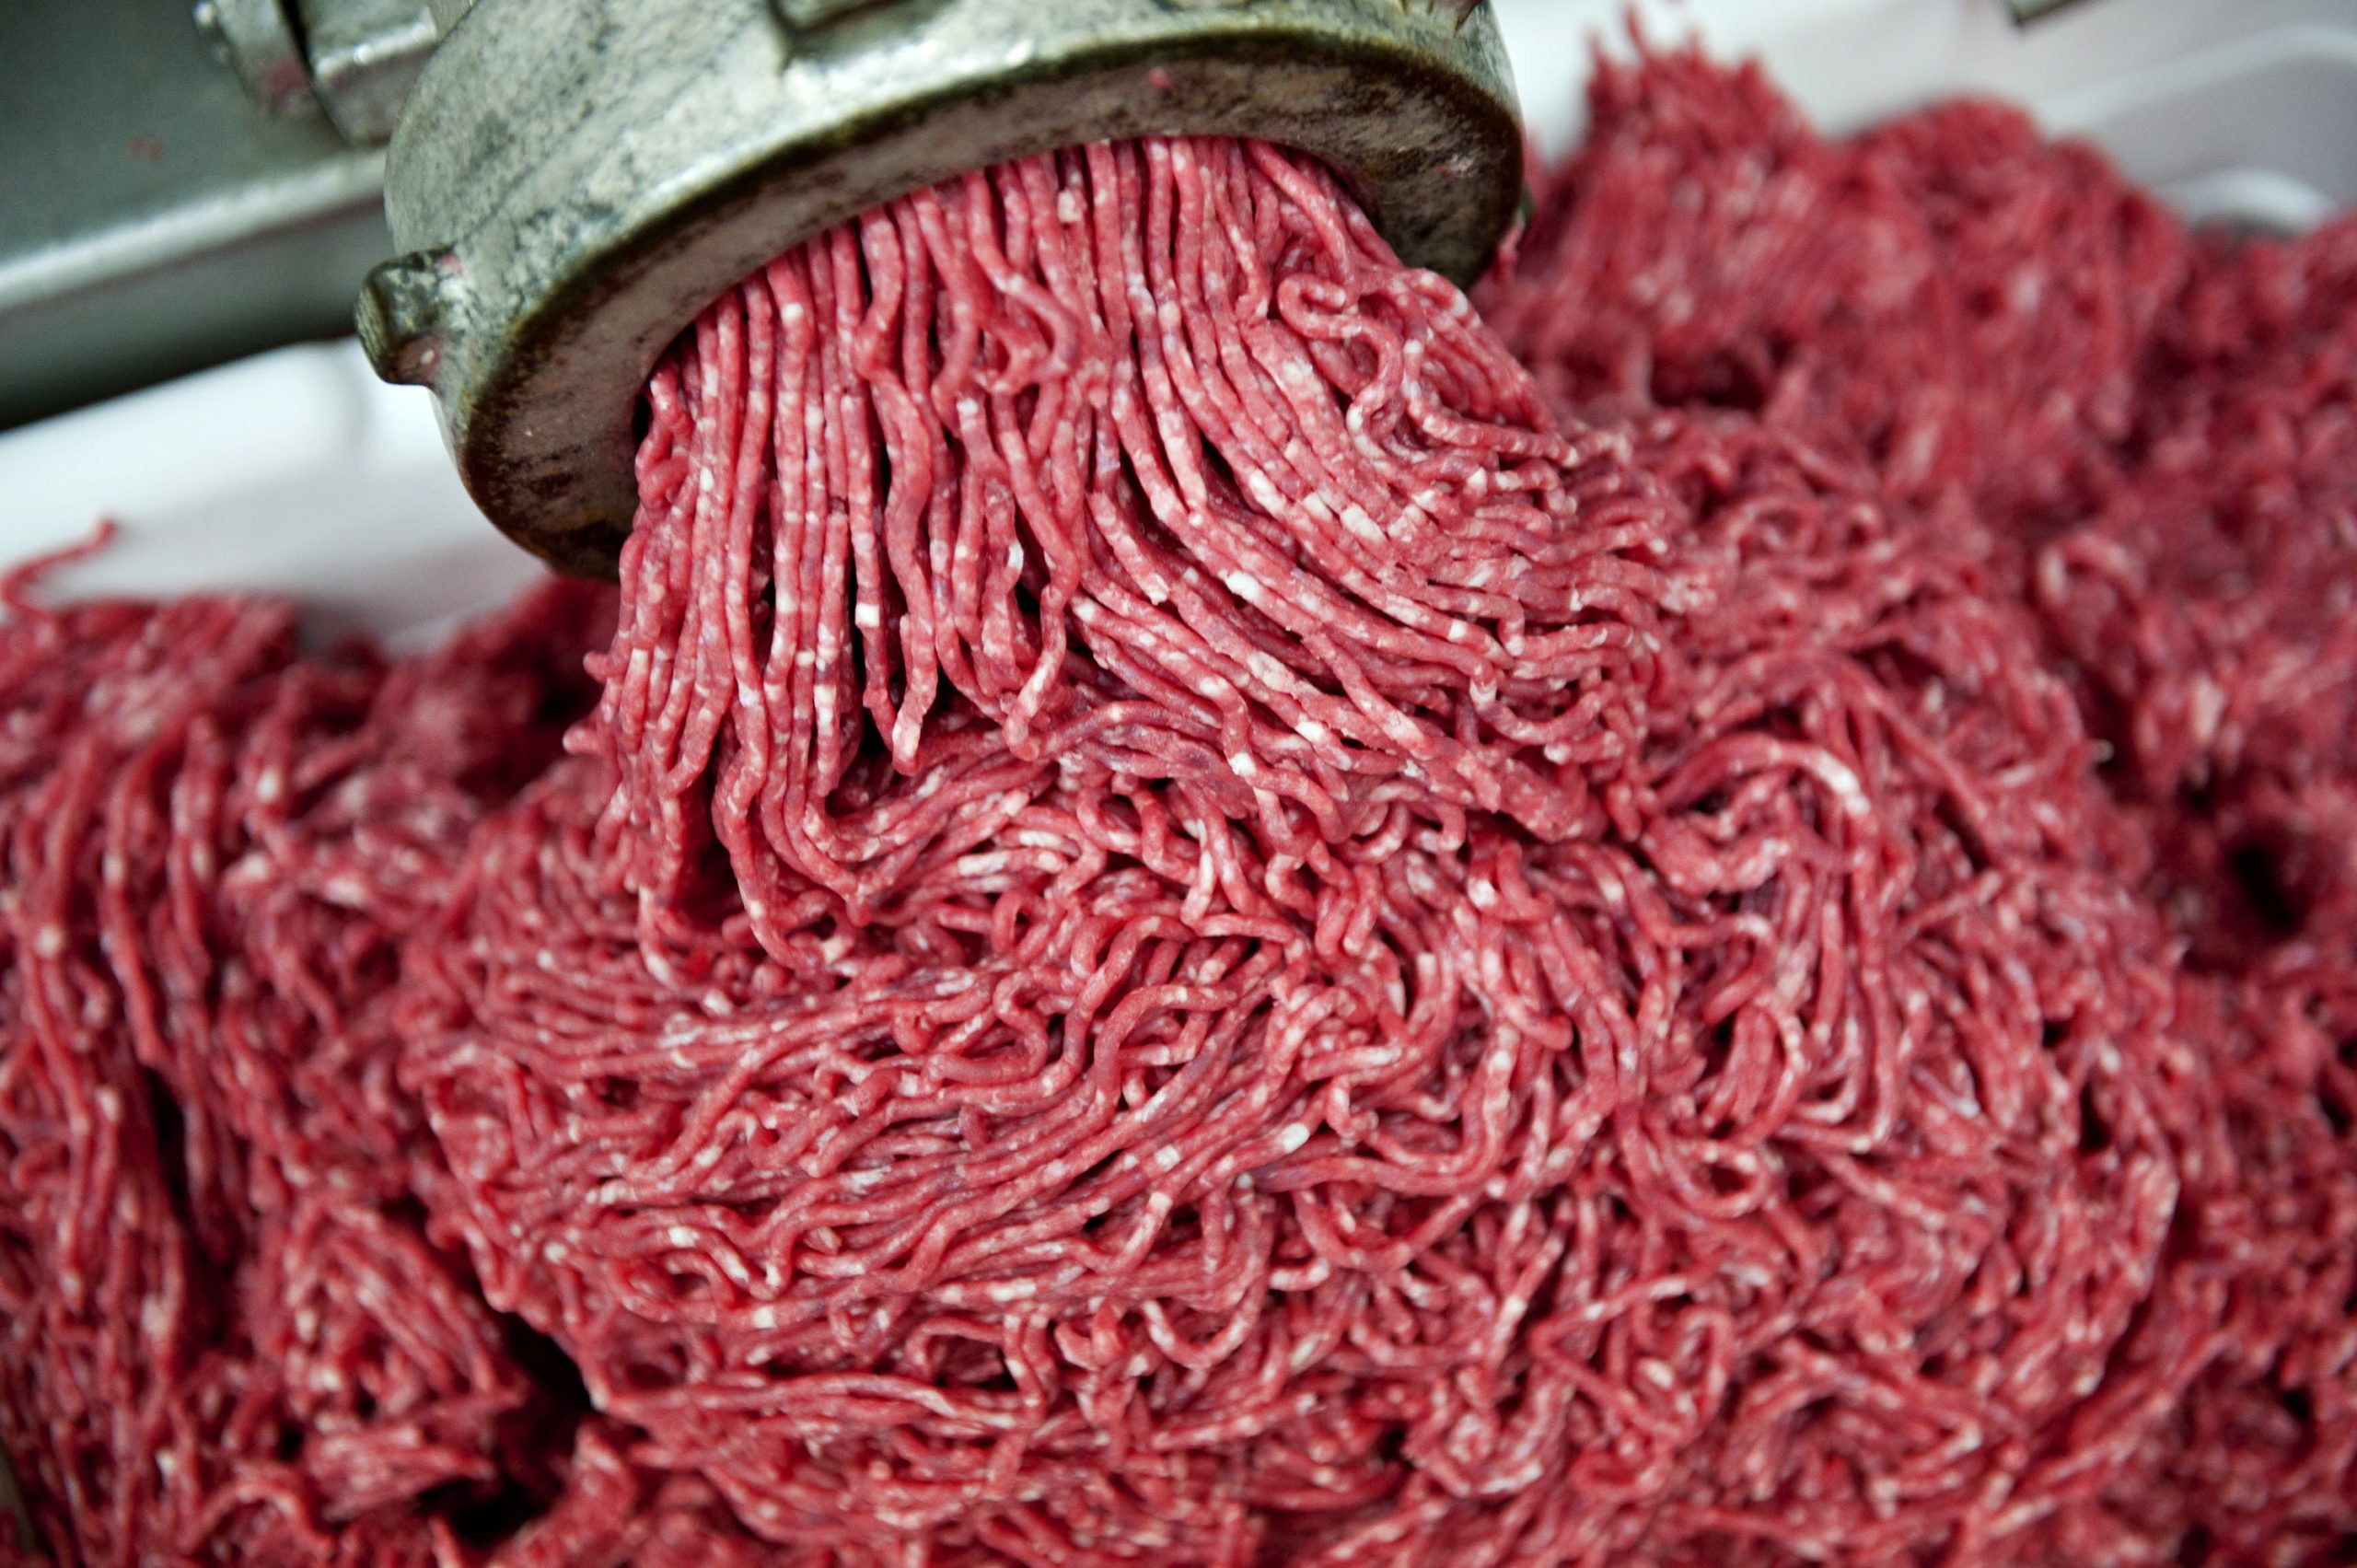 FSIS Issues Public Health Alert for Ground Beef that tested positive for E. Coli O157:H7